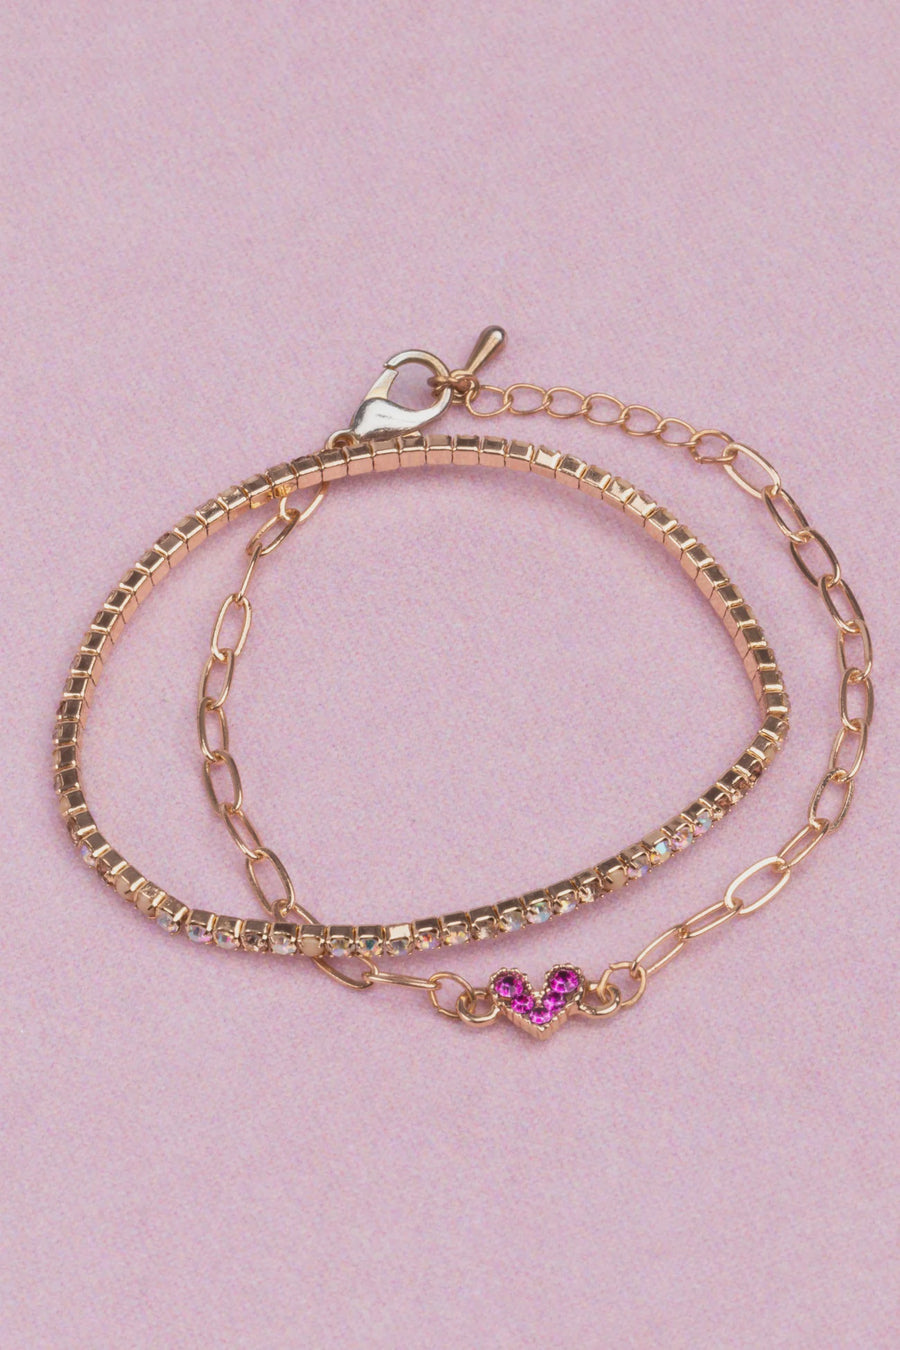 Great Pretenders - Boutique Chic Linked with Love Bracelet